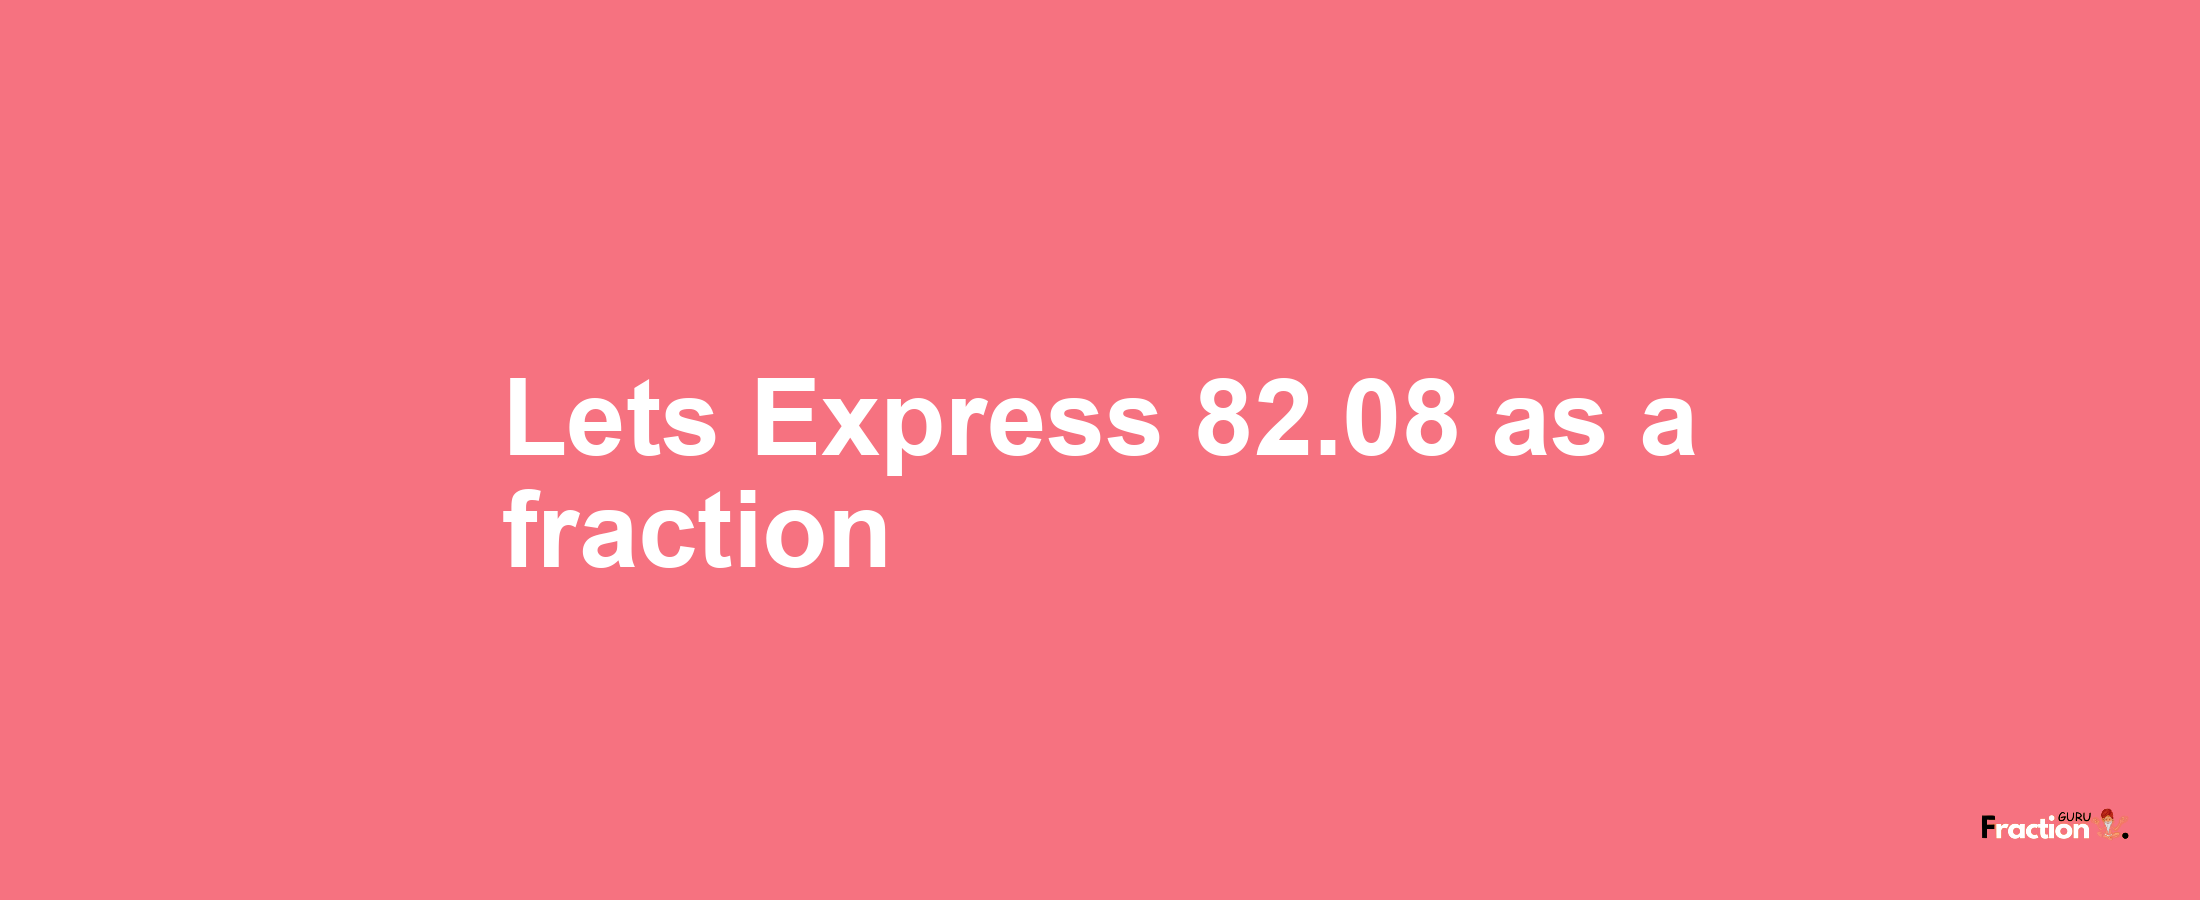 Lets Express 82.08 as afraction